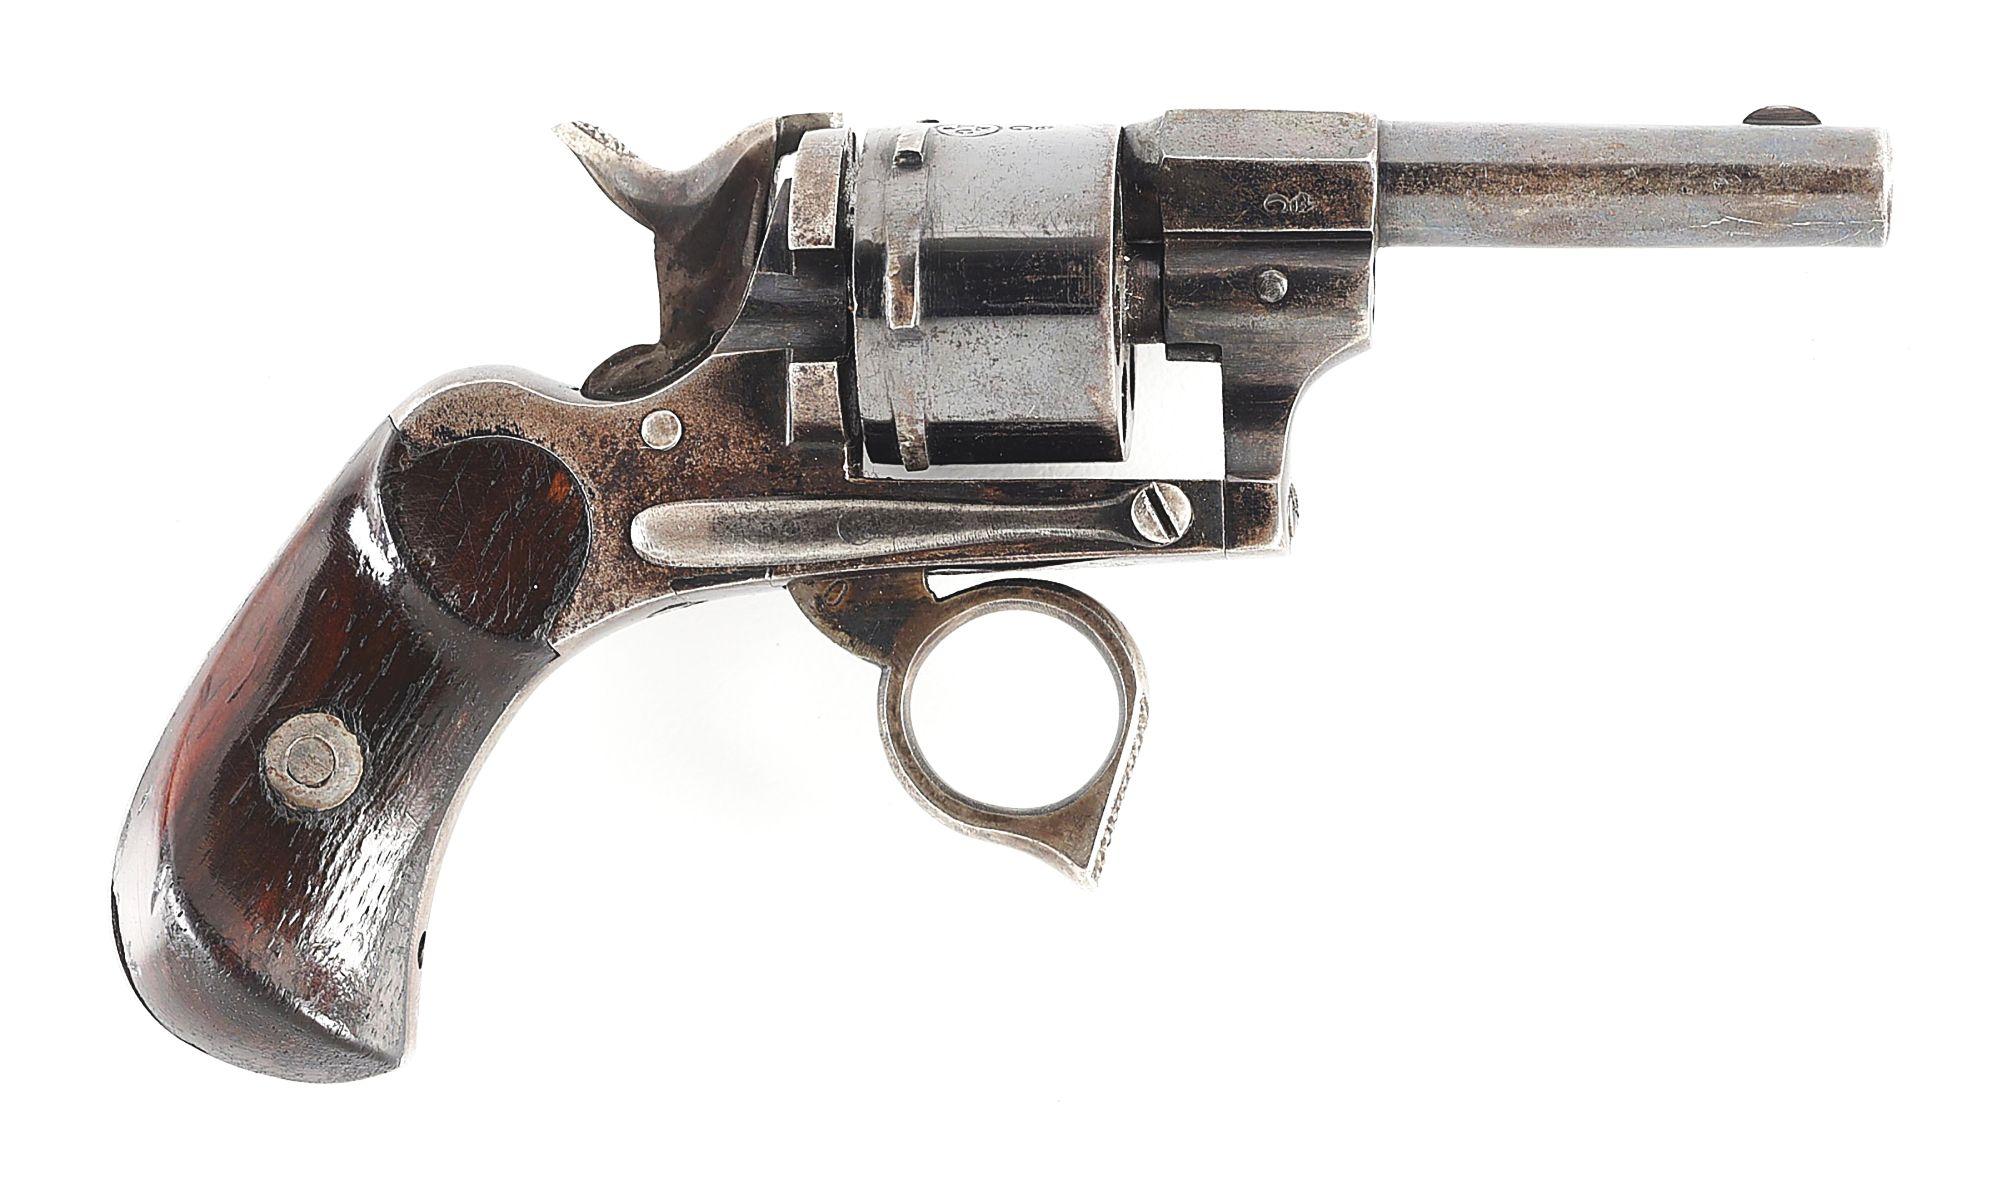 (A) DIMINUTIVE DALY ARMS CO. TOM THUMB DOUBLE ACTION REVOLVER.